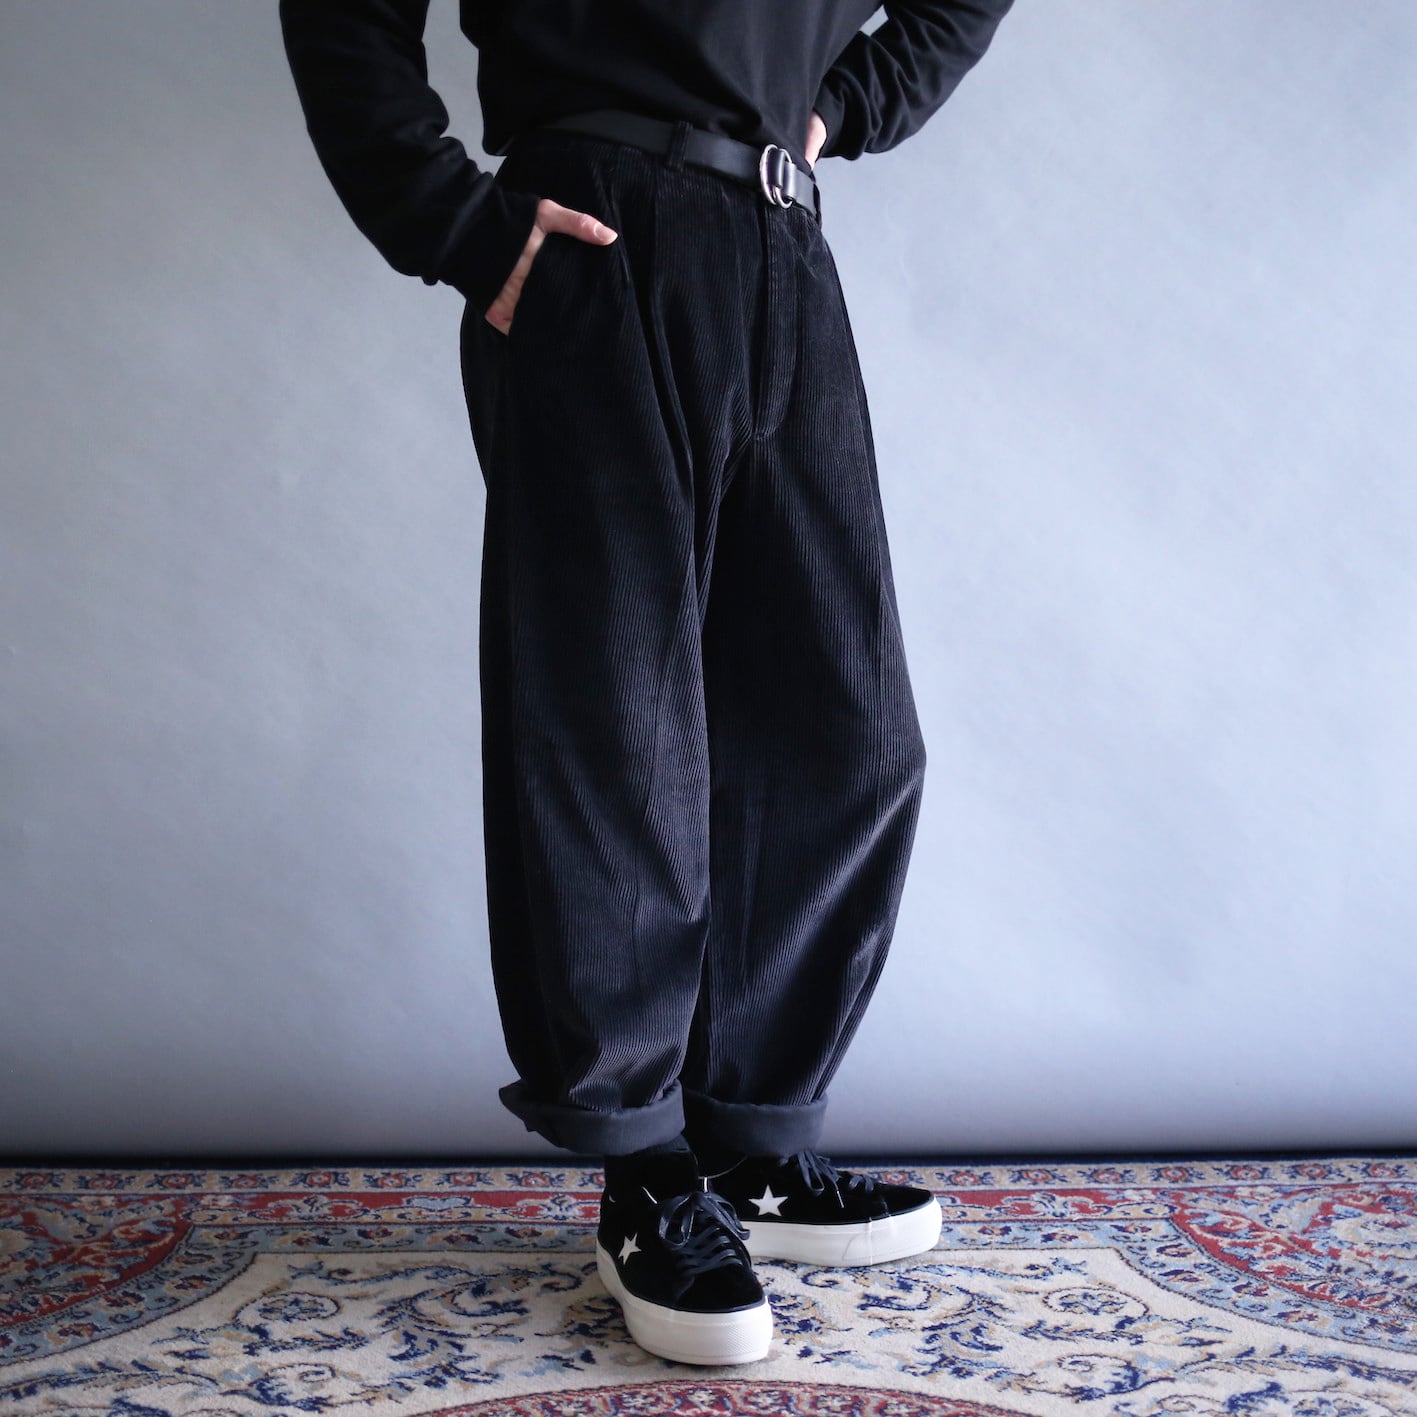 "Burberry" 2-tuck tapered silhouette black wide corduroy pants